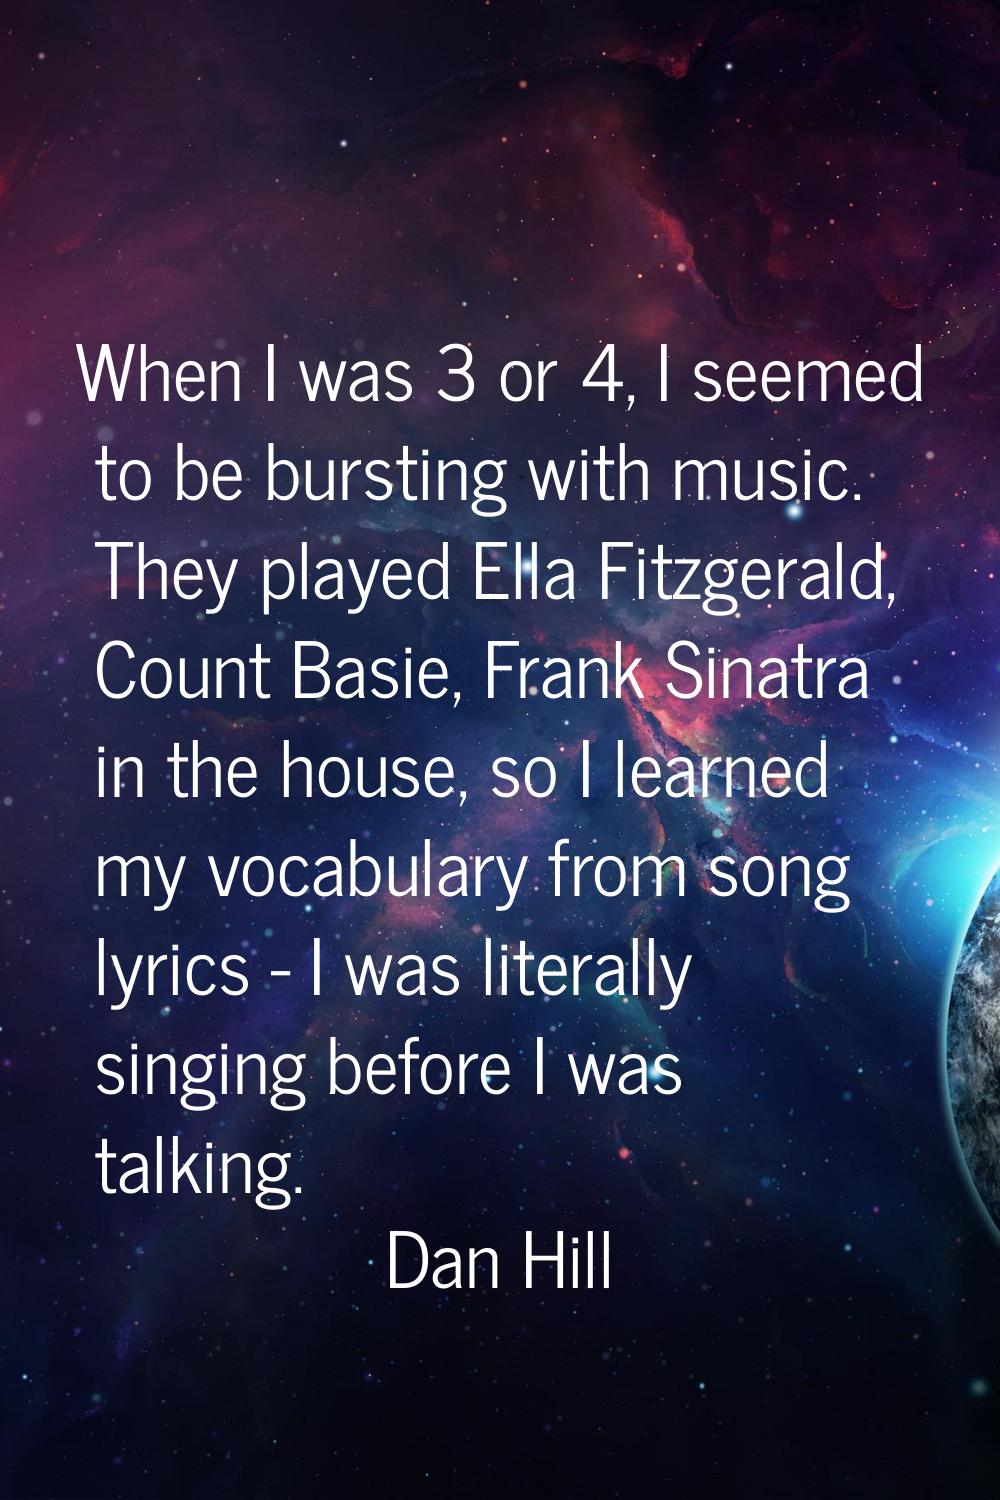 When I was 3 or 4, I seemed to be bursting with music. They played Ella Fitzgerald, Count Basie, Fr